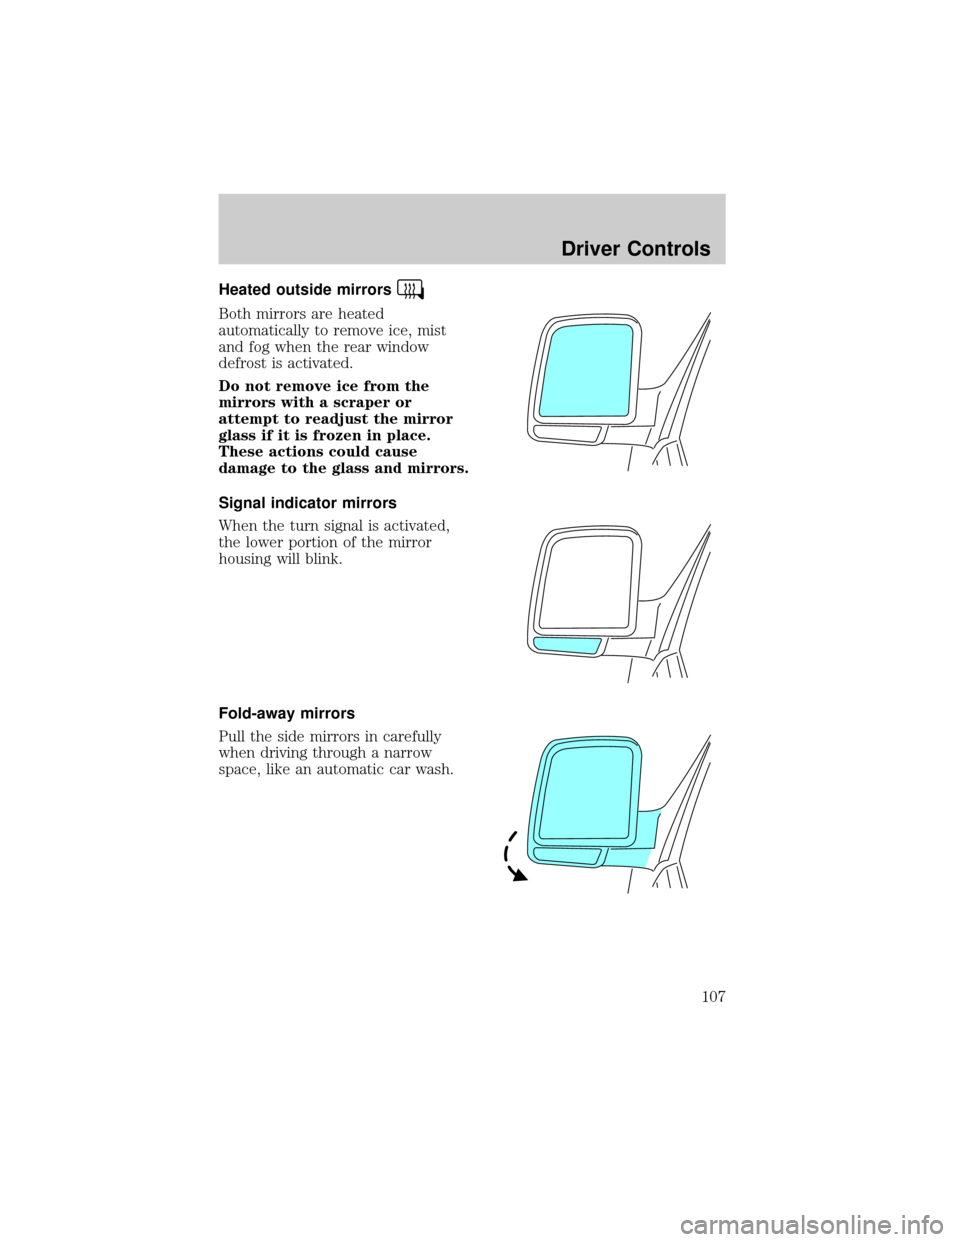 LINCOLN AVIATOR 2004  Owners Manual Heated outside mirrors
Both mirrors are heated
automatically to remove ice, mist
and fog when the rear window
defrost is activated.
Do not remove ice from the
mirrors with a scraper or
attempt to read